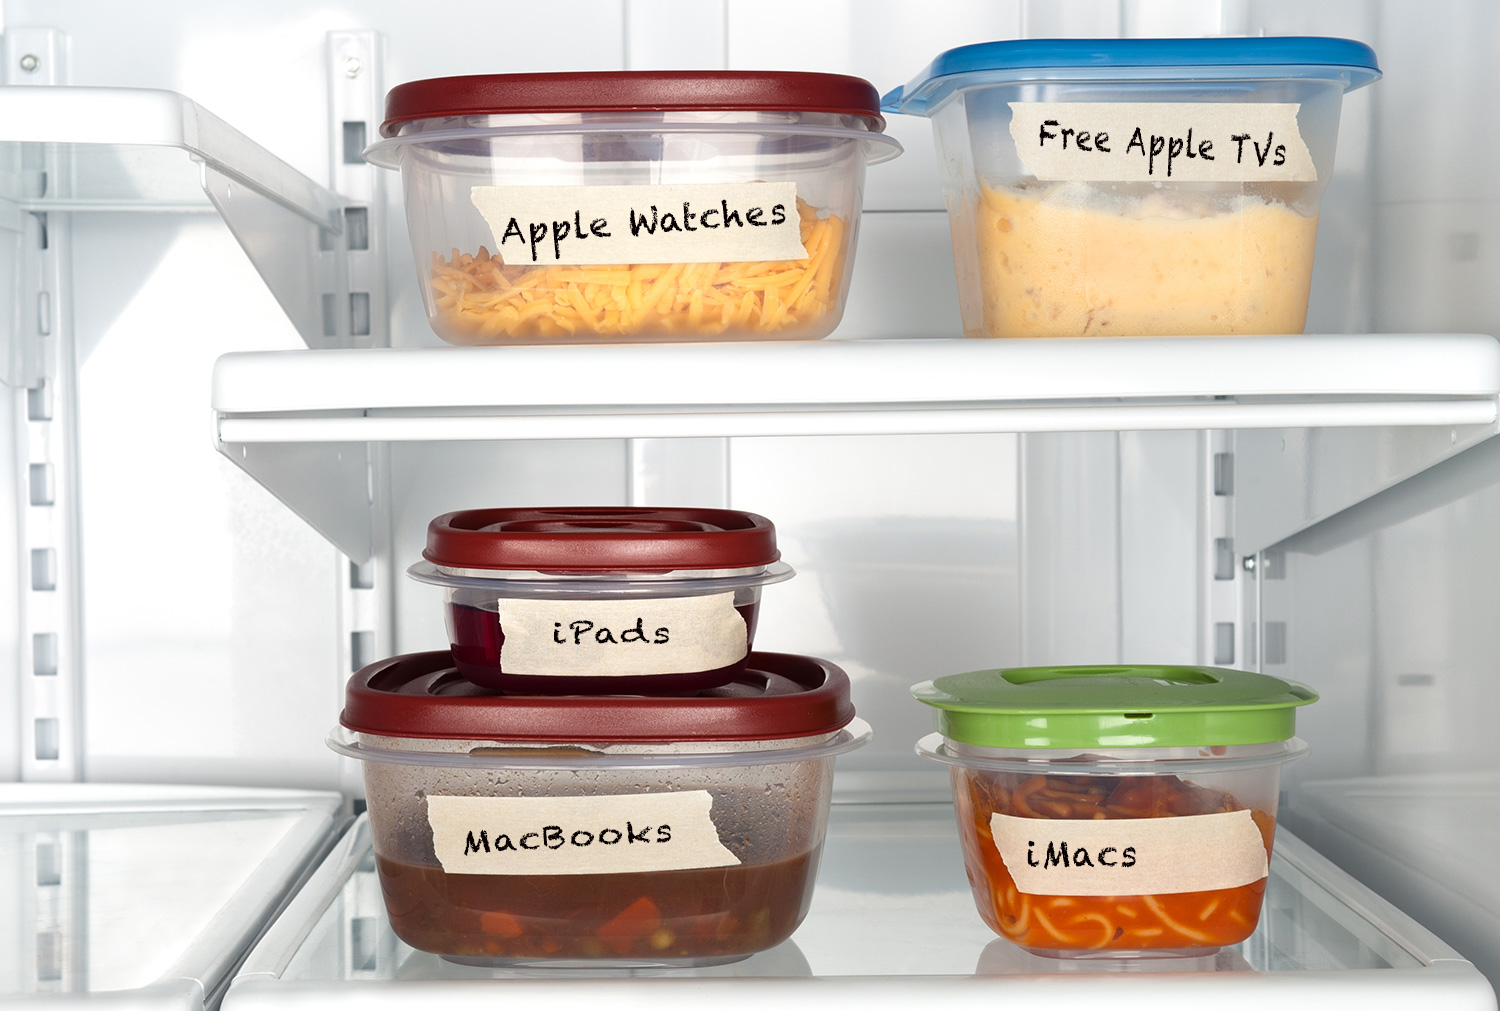 photo of Leftovers: Here are the best Apple deals still fresh following Black Friday & Cyber Monday sellouts image